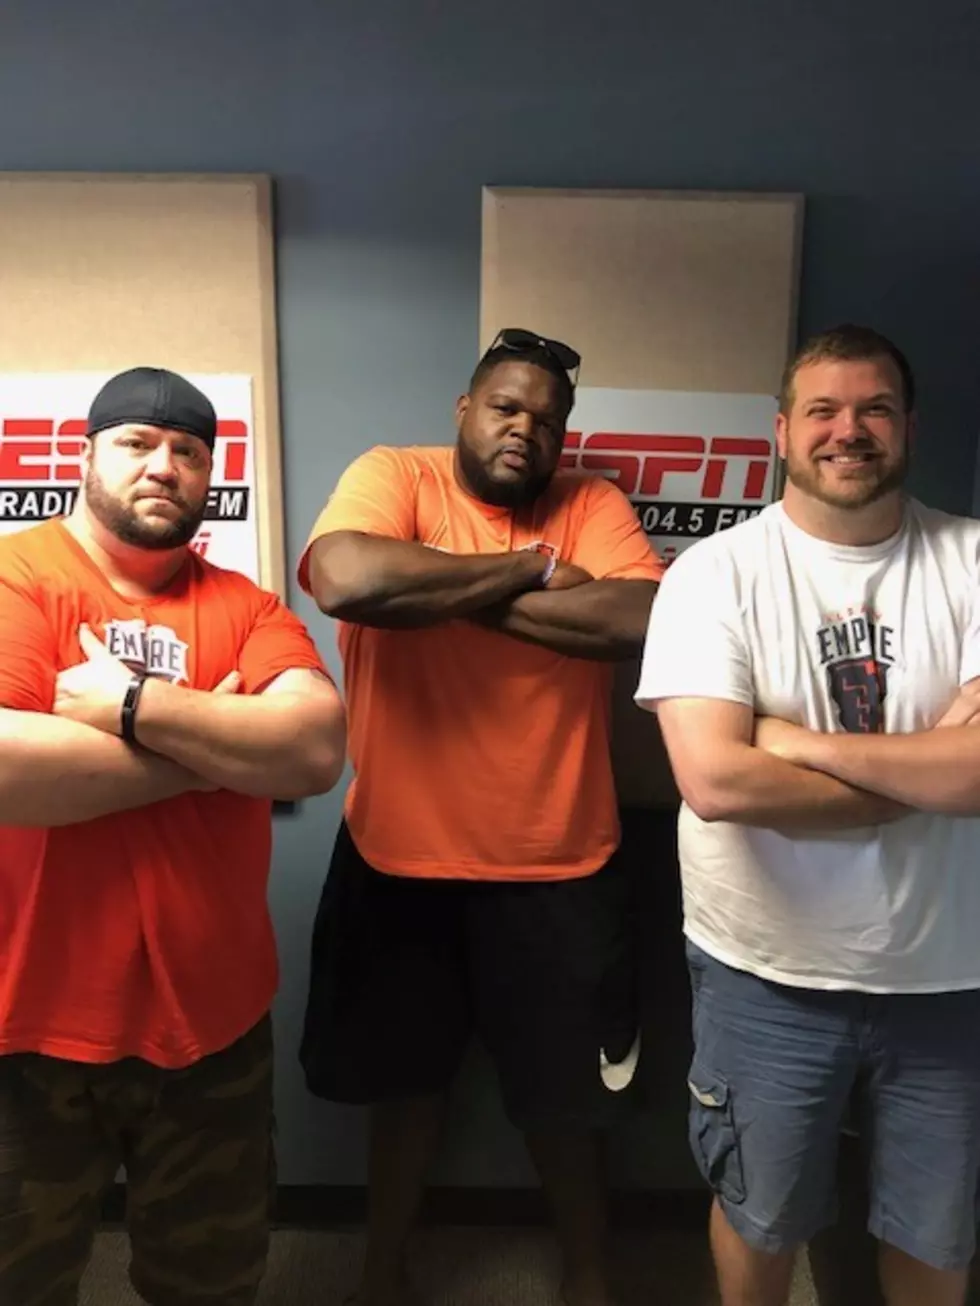 Albany Empire’s Ryan Cave On Unfinished Business [AUDIO]